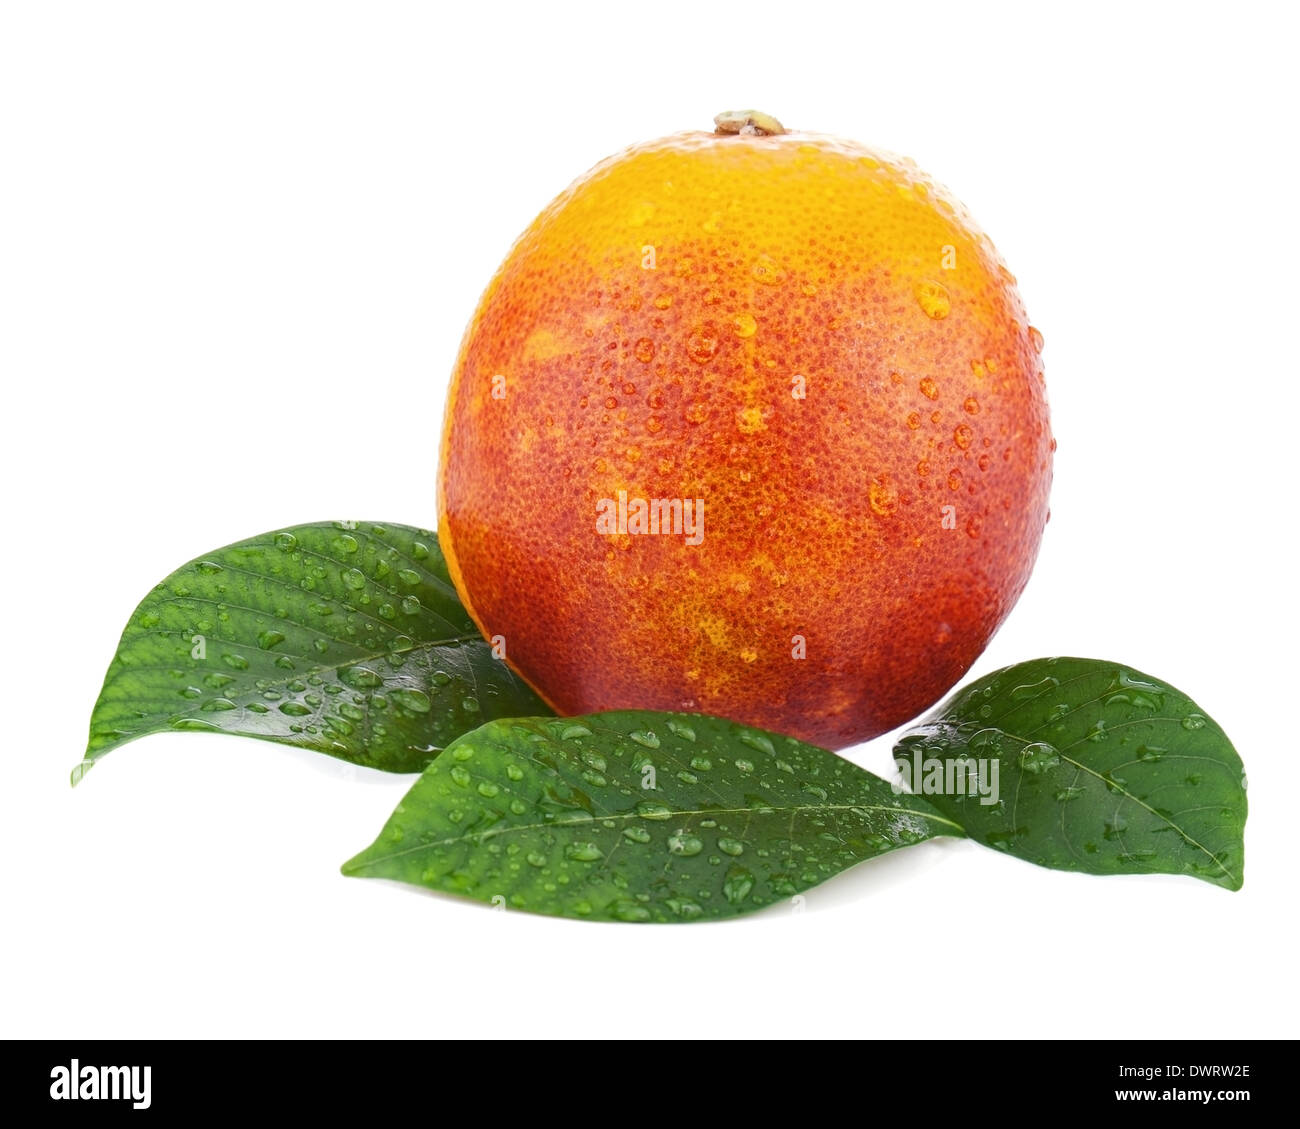 Ripe red blood oranges with green leaves isolated on white background. Closeup. Stock Photo